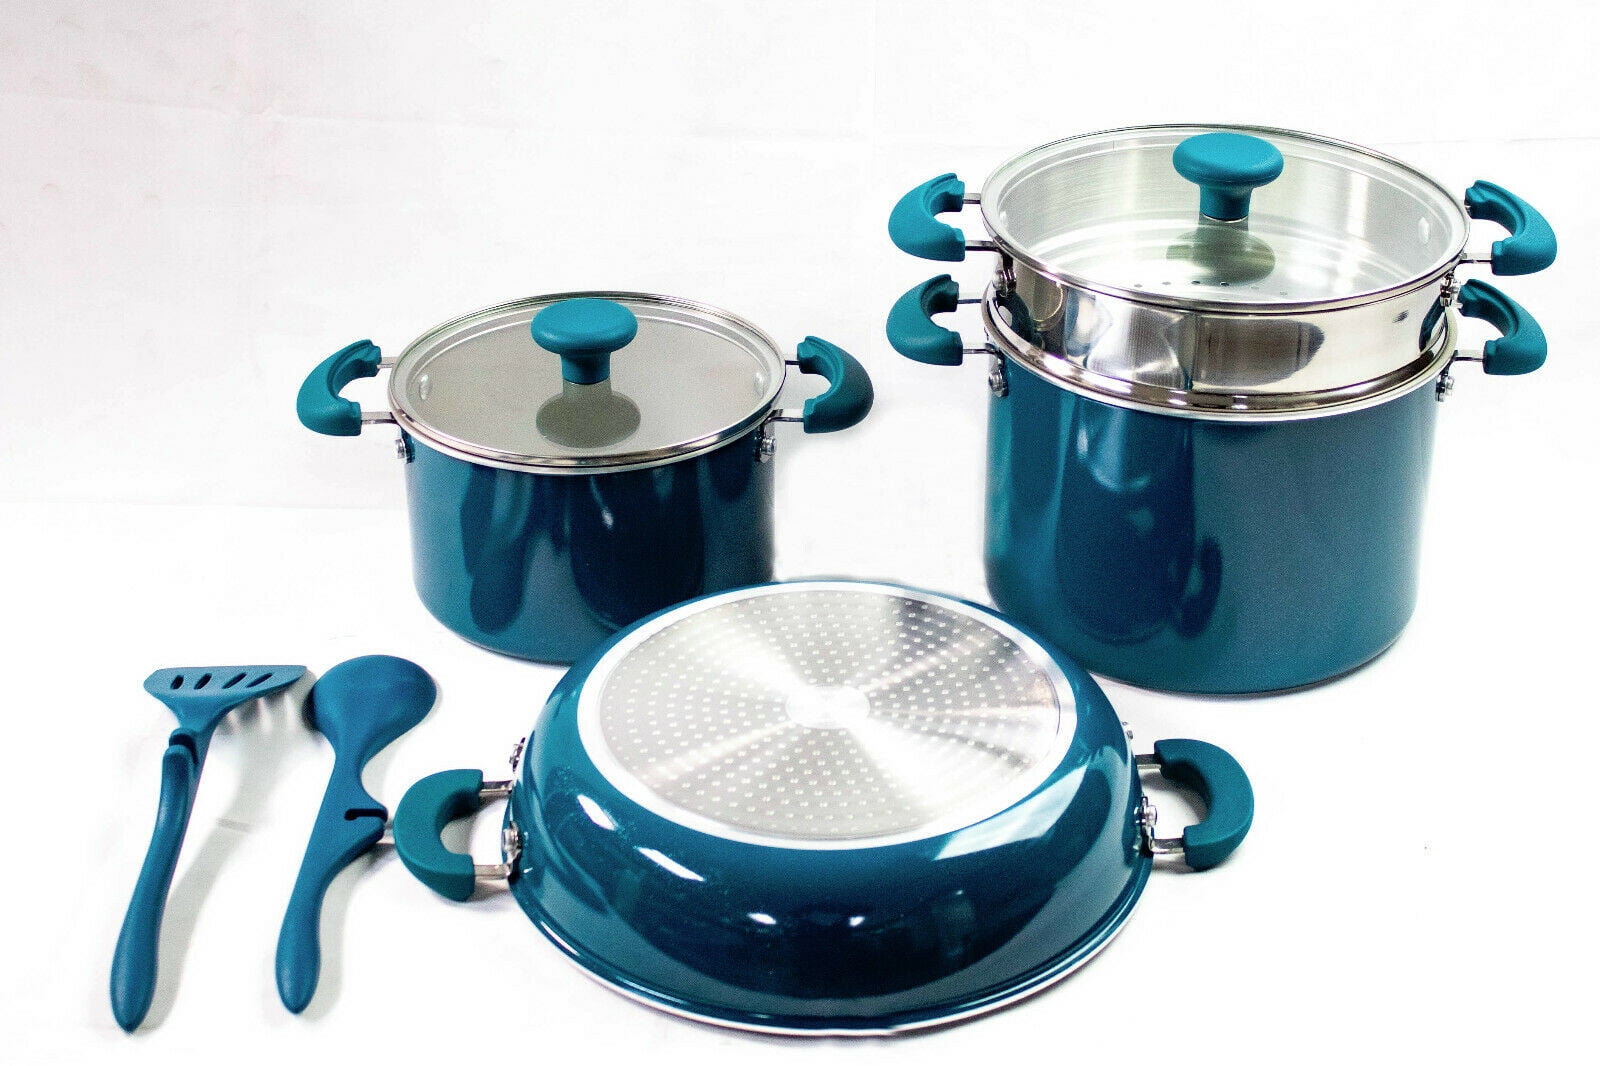  Rachael Ray Get Cooking Stackable Nonstick Pots and Pans, Cookware  Set (8 Piece), Turquoise: Home & Kitchen